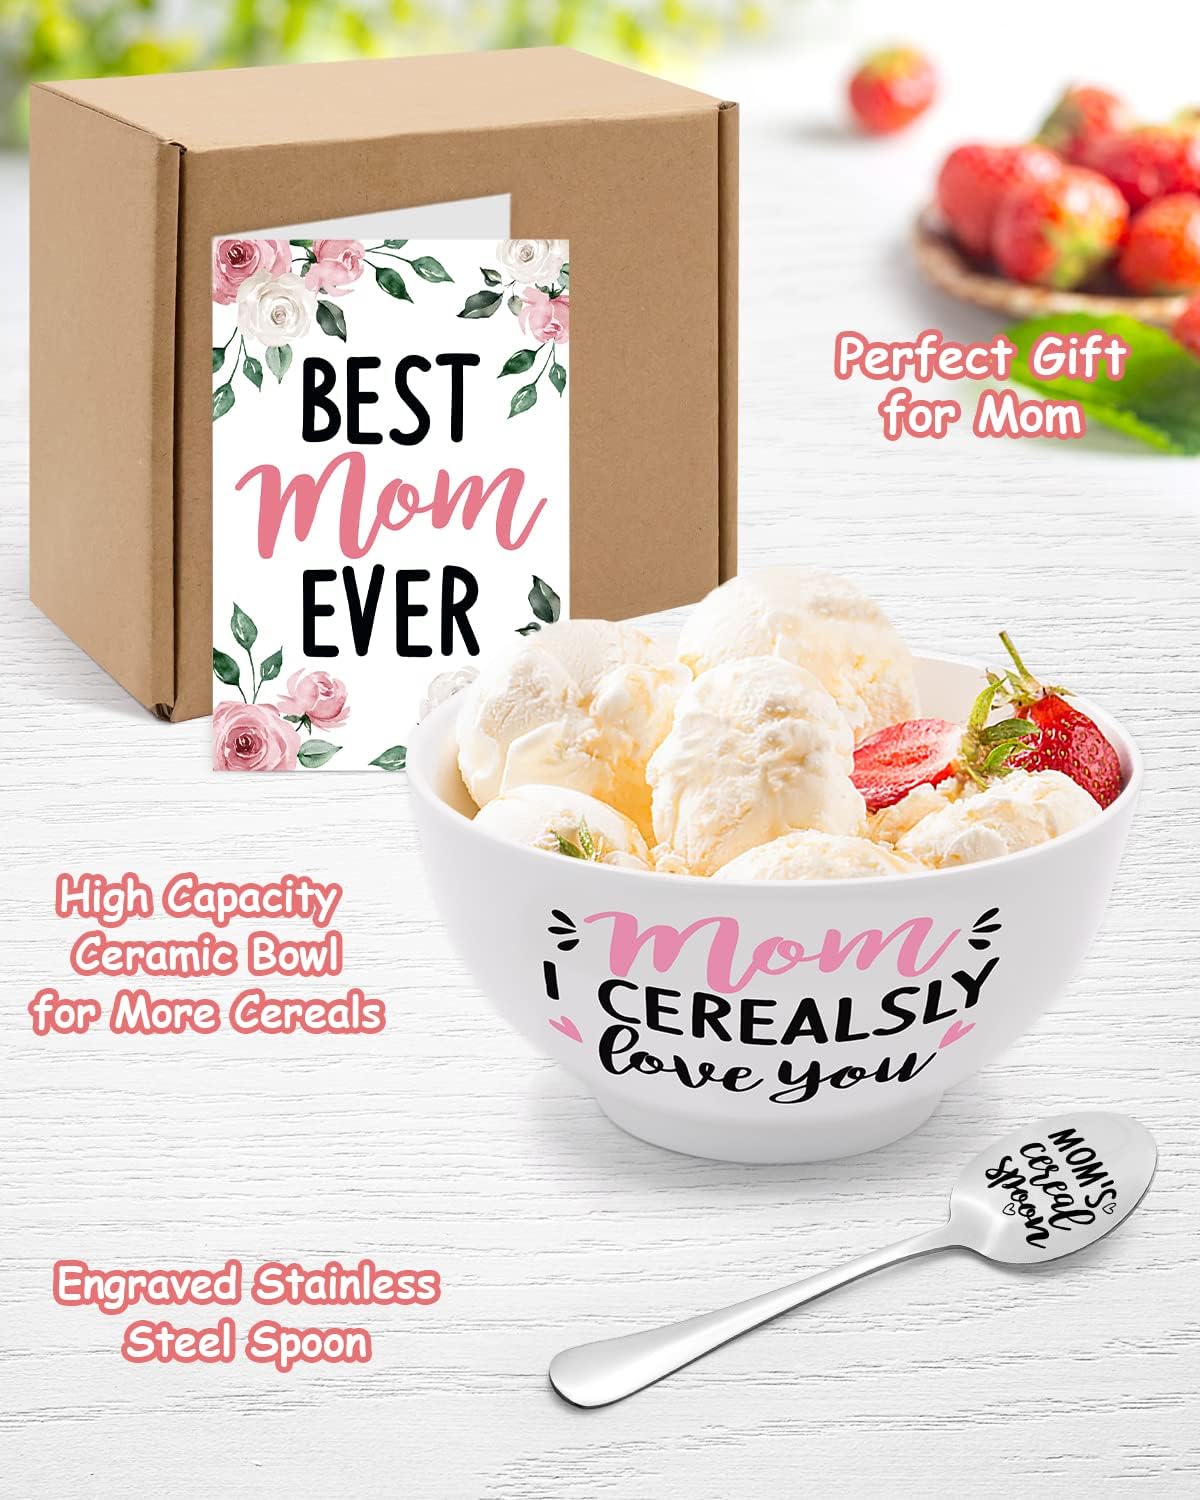 Mom's Cereal Bowl and Spoon Set with Best Mom Ever Gift Set of 3 momhomedecor